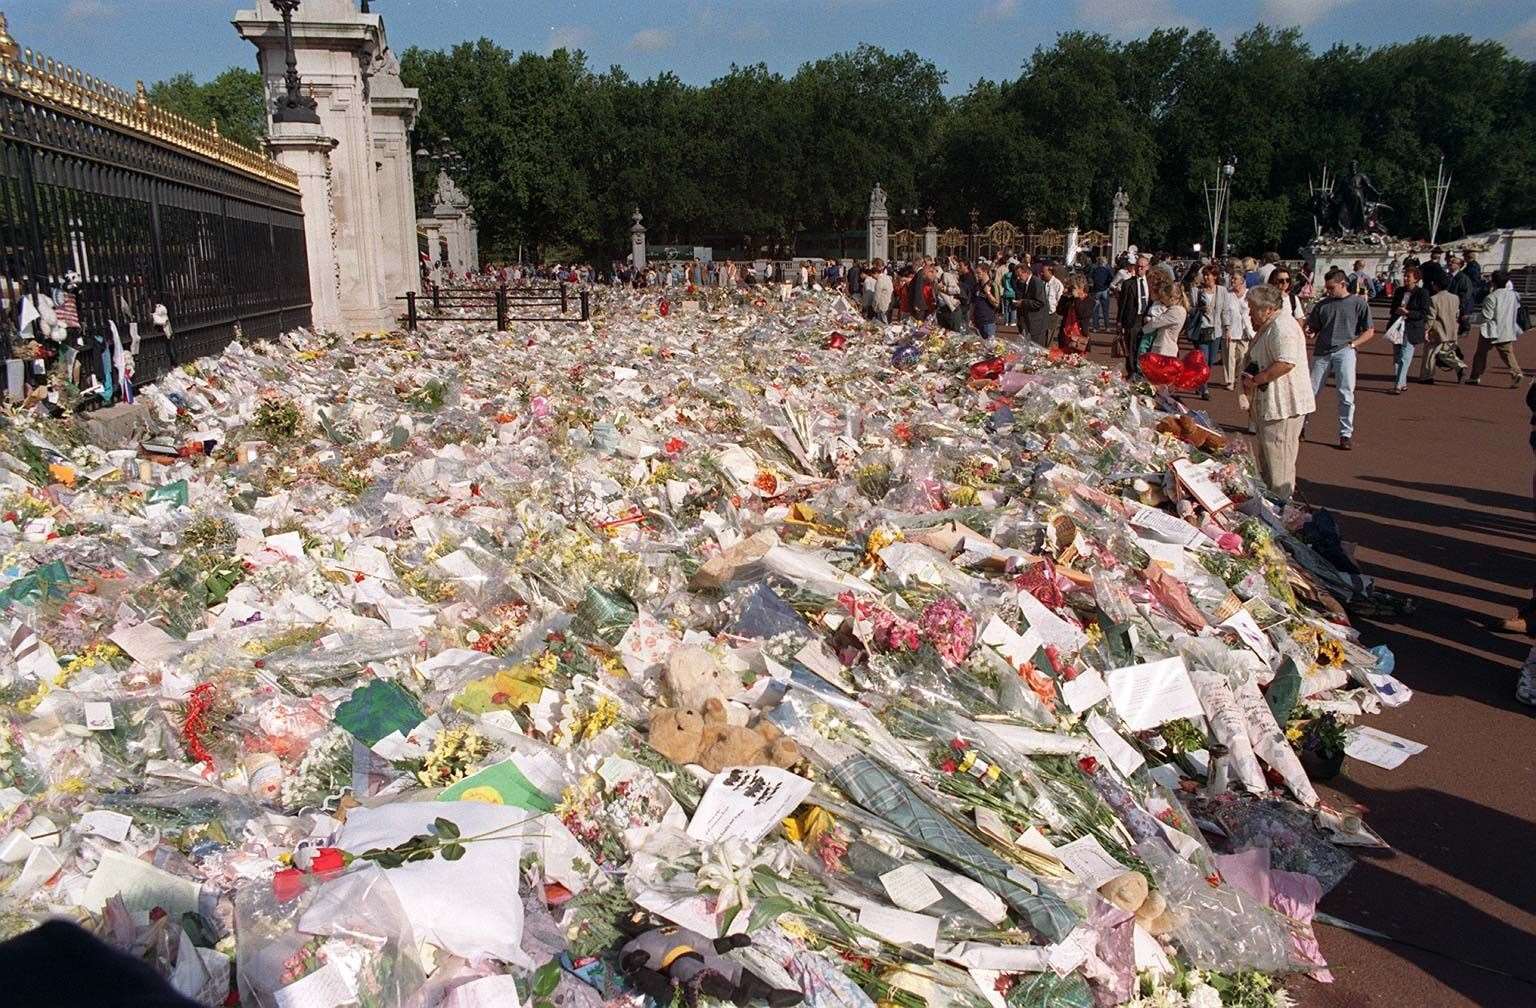 Flowers for Diana outside the gates of Buckingham Palace following her death (Ben Curtis/PA)